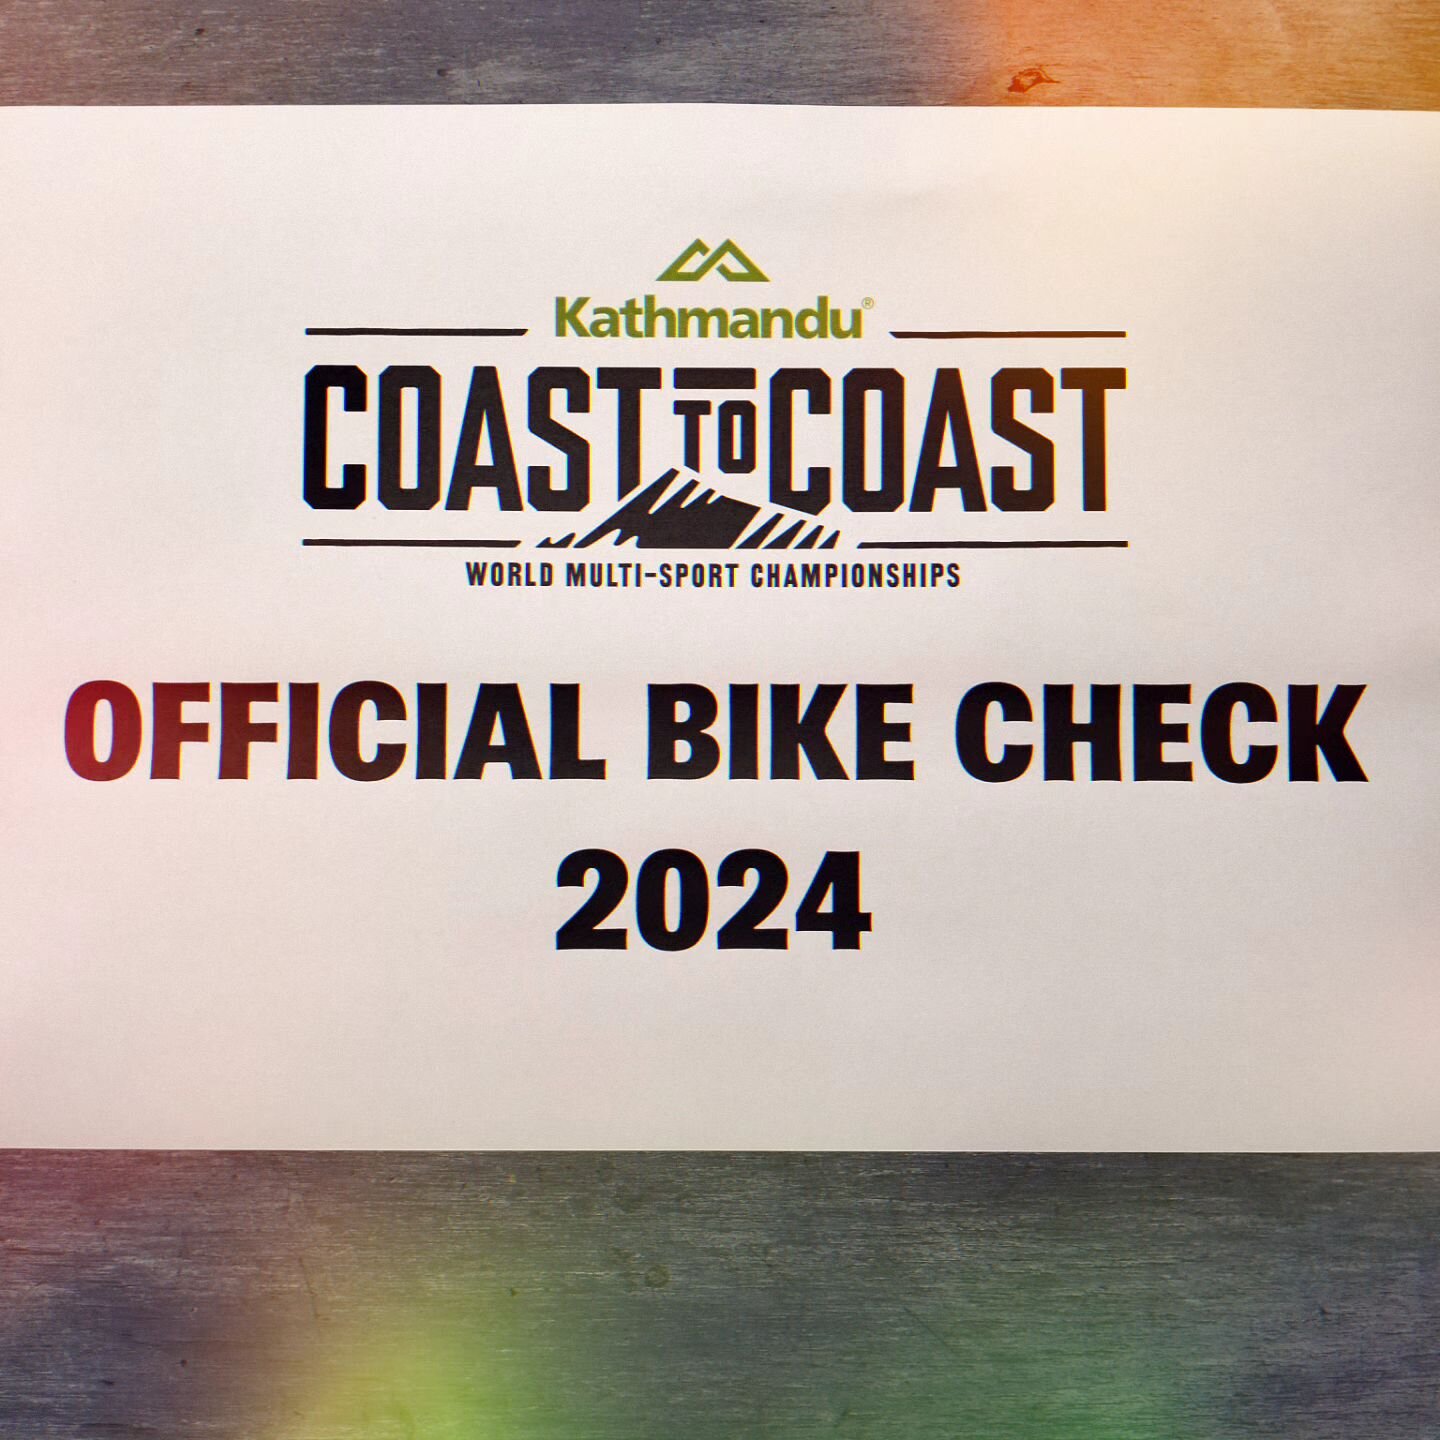 Proud to be an official bike check hub for the grueling Coast to Coast world multi-sport championships.